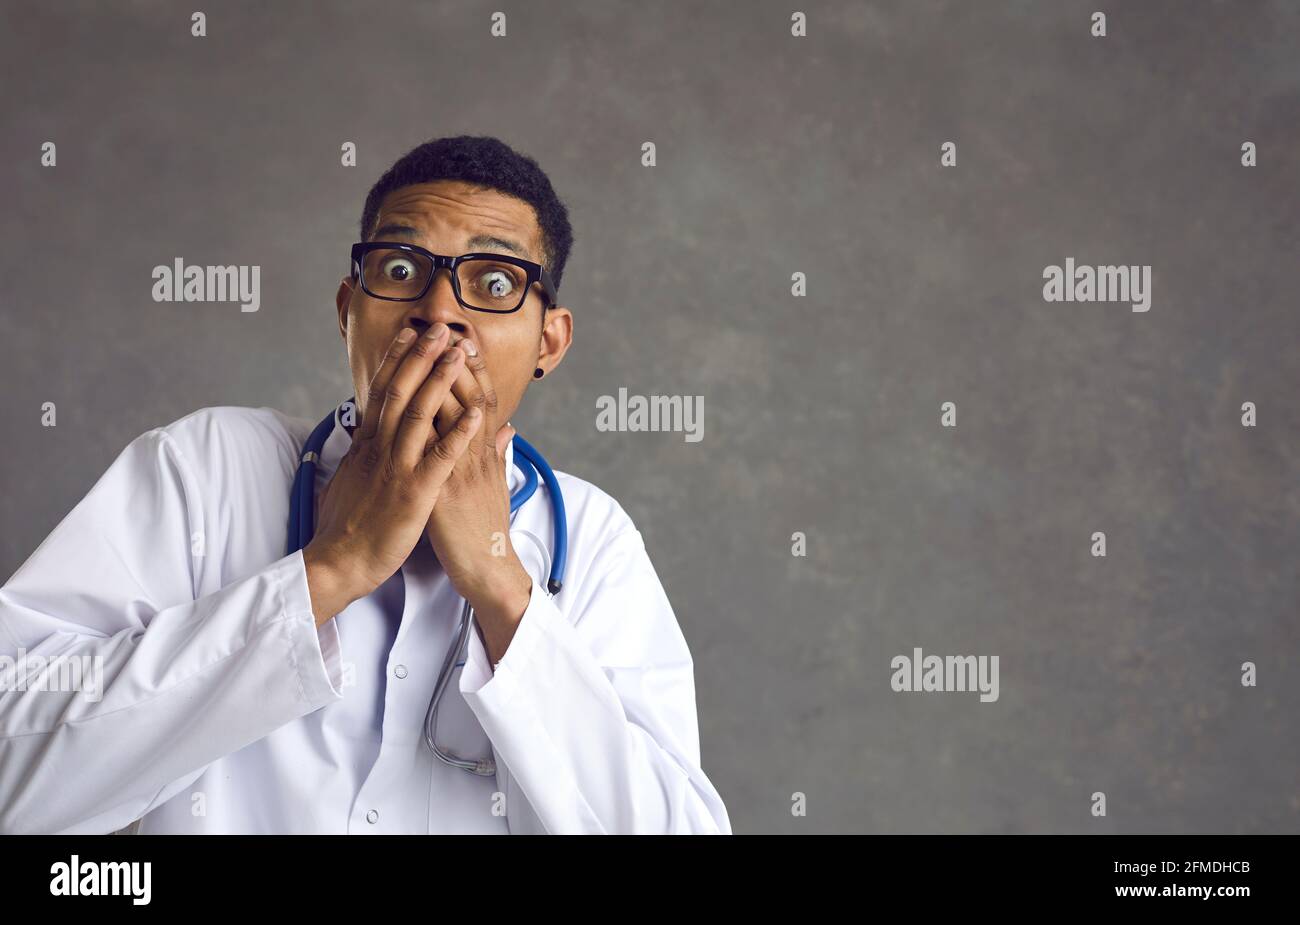 African american male doctor with a frightened expression covers his mouth on a gray background. Stock Photo